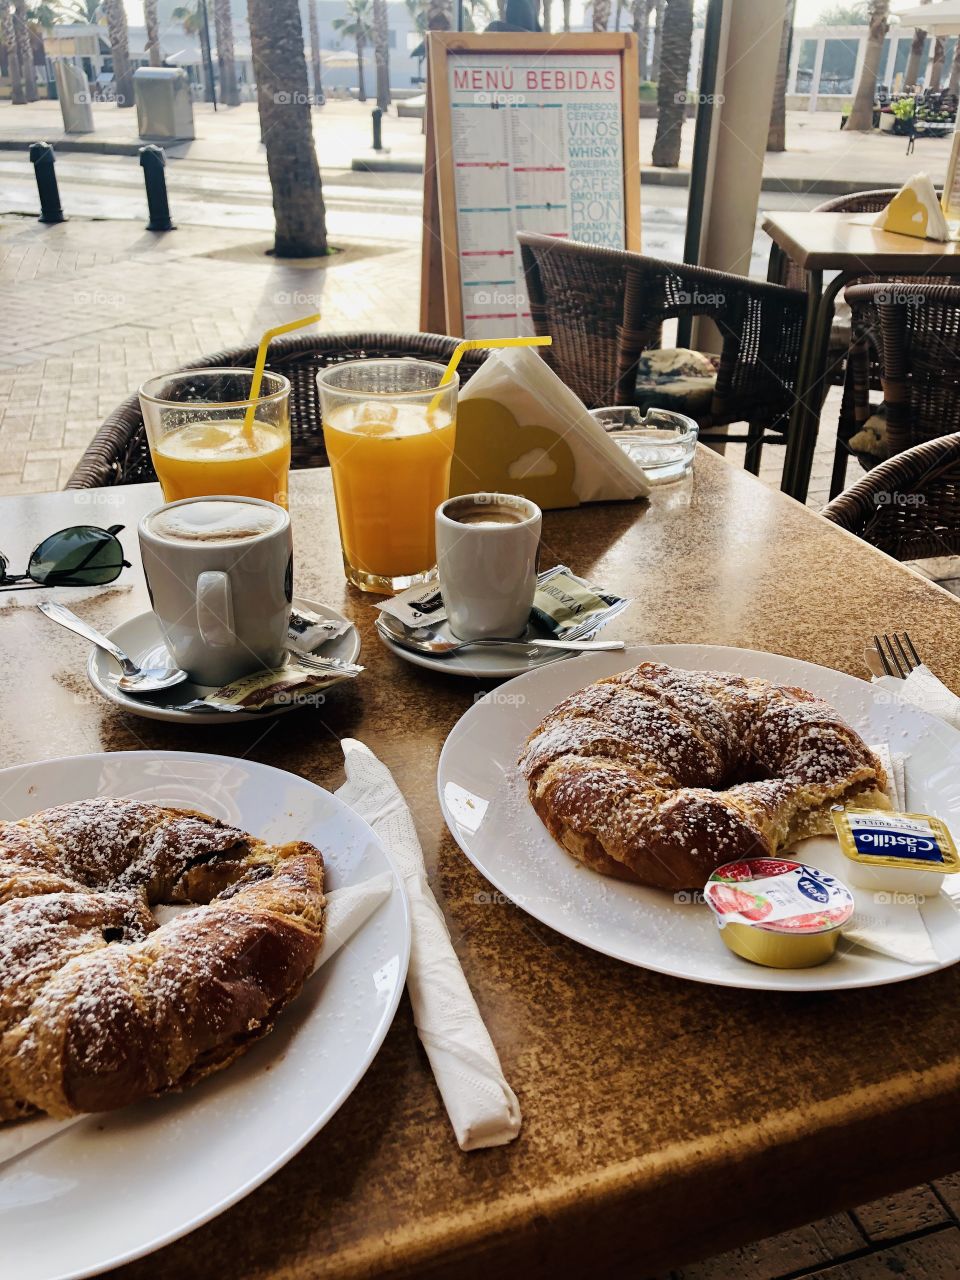 A good start of the day. Juice and croissant in Spain is the best. Lovely breakfast near the sea, enjoy life! 